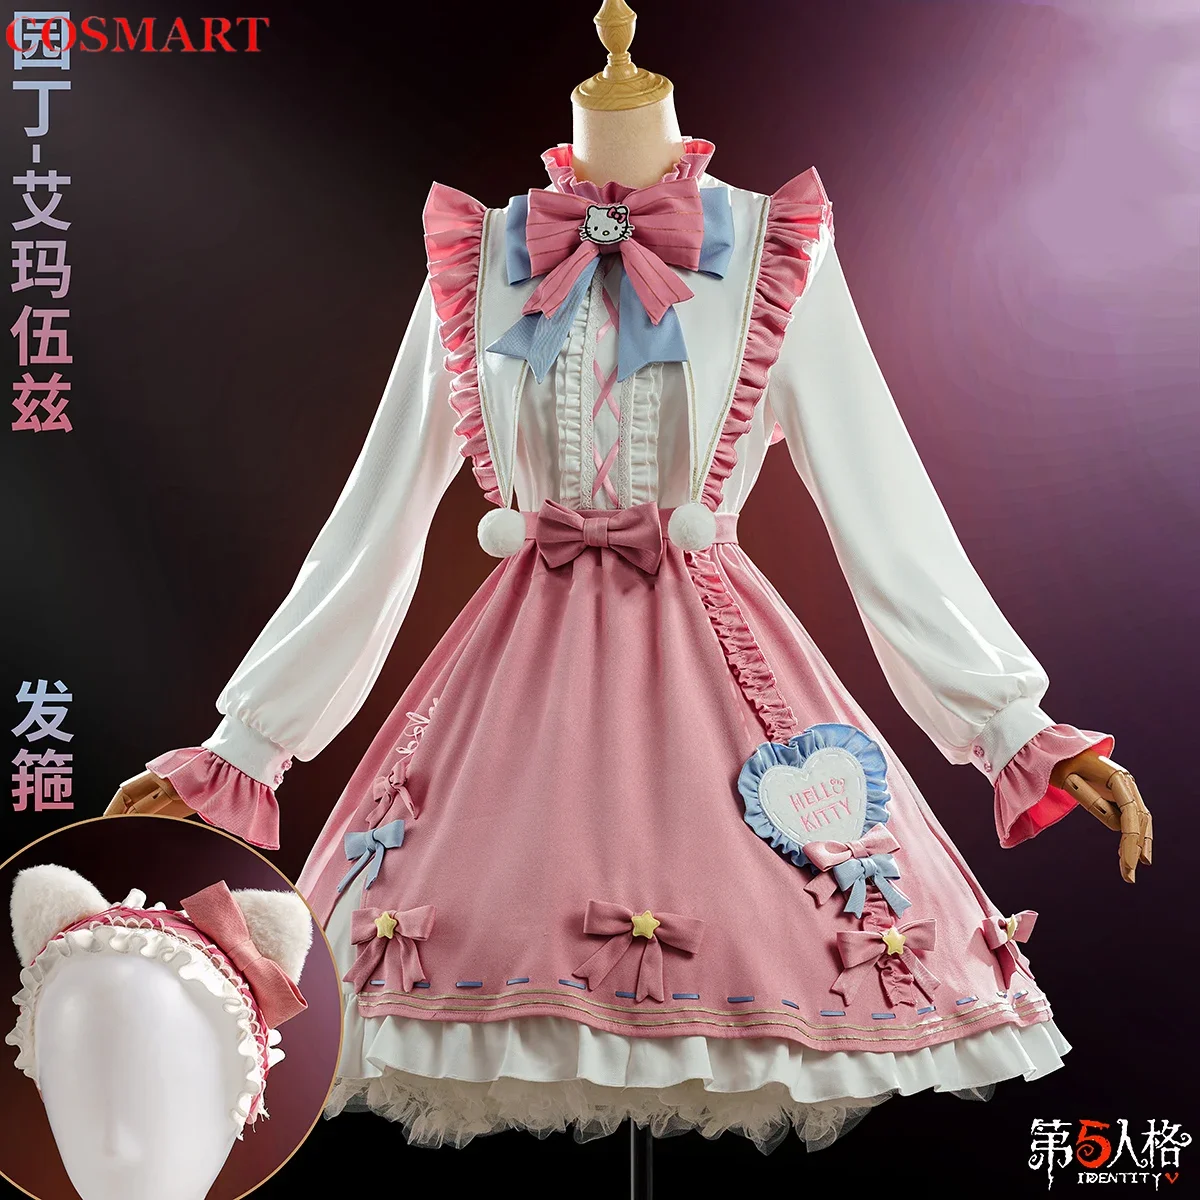 

COSMART Identity V Emma Woods Game Suit Sweet Lovely Lolita Dress Cosplay Costume Halloween Party Role Play Outfit Women S-XXL